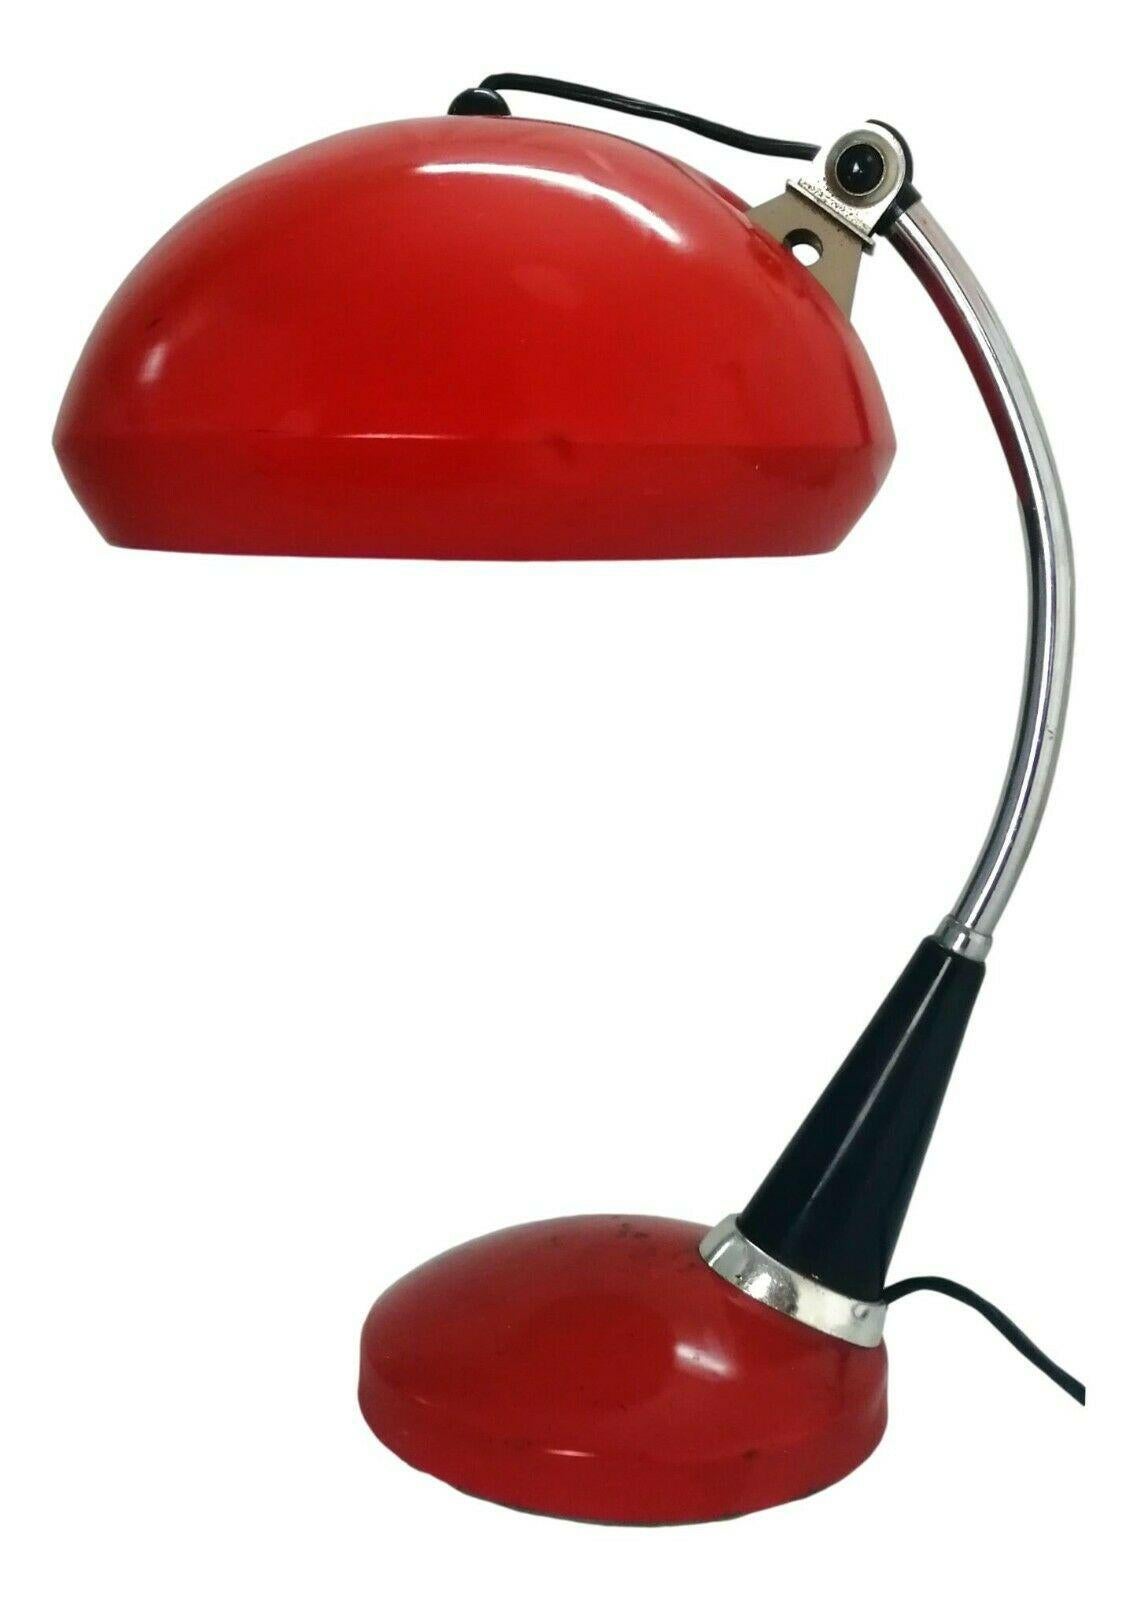 Original design table lamp from the 1960s, of unknown production, probably designed by Christian Dell, made on a metal structure with steel interventions, diffuser with joint

Measuring 40 cm in height, diffuser diameter 24 cm, base diameter 16